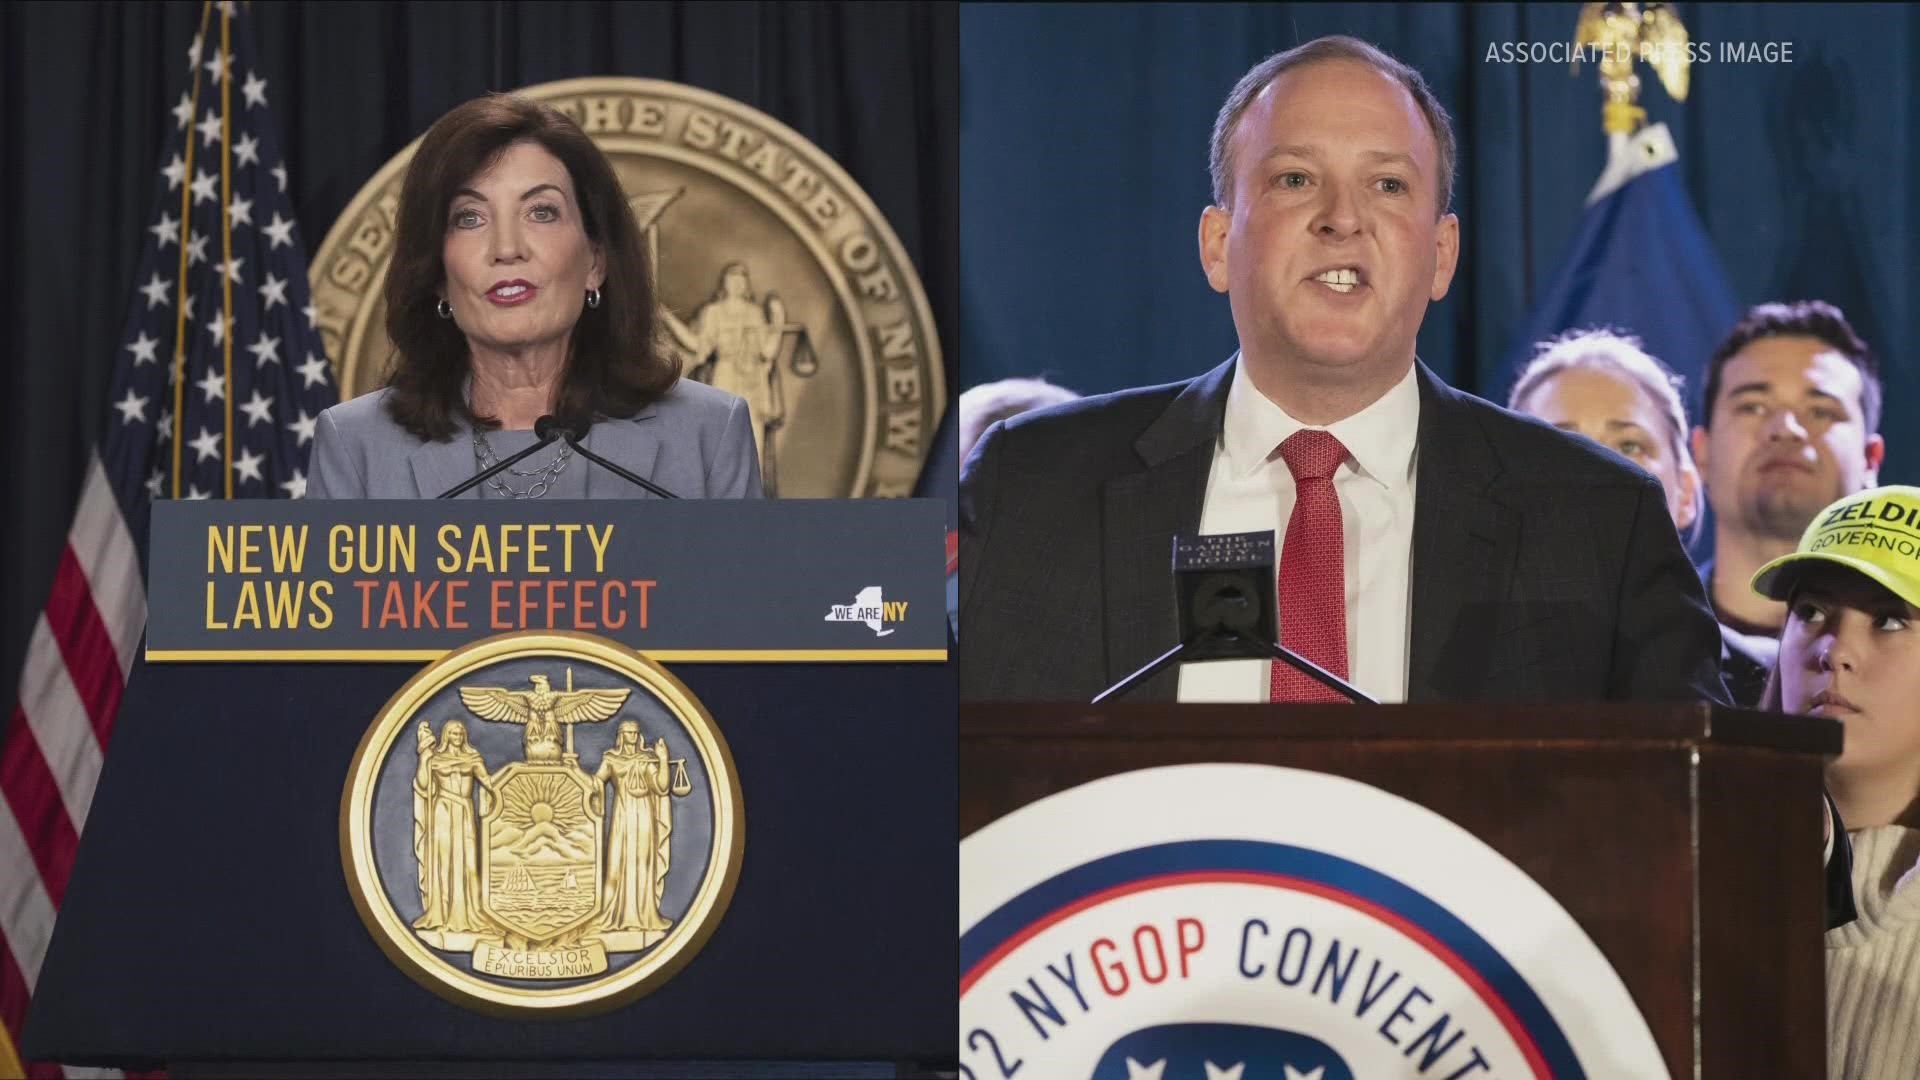 SIENA FOUND THAT GOVERNOR KATHY HOCHUL LEADS BY 11 POINTS... WHILE QUINNIPIAC HAD HER OPPONENT CONGRESSMAN LEE ZELDIN *ONLY TRAILING 4 POINTS